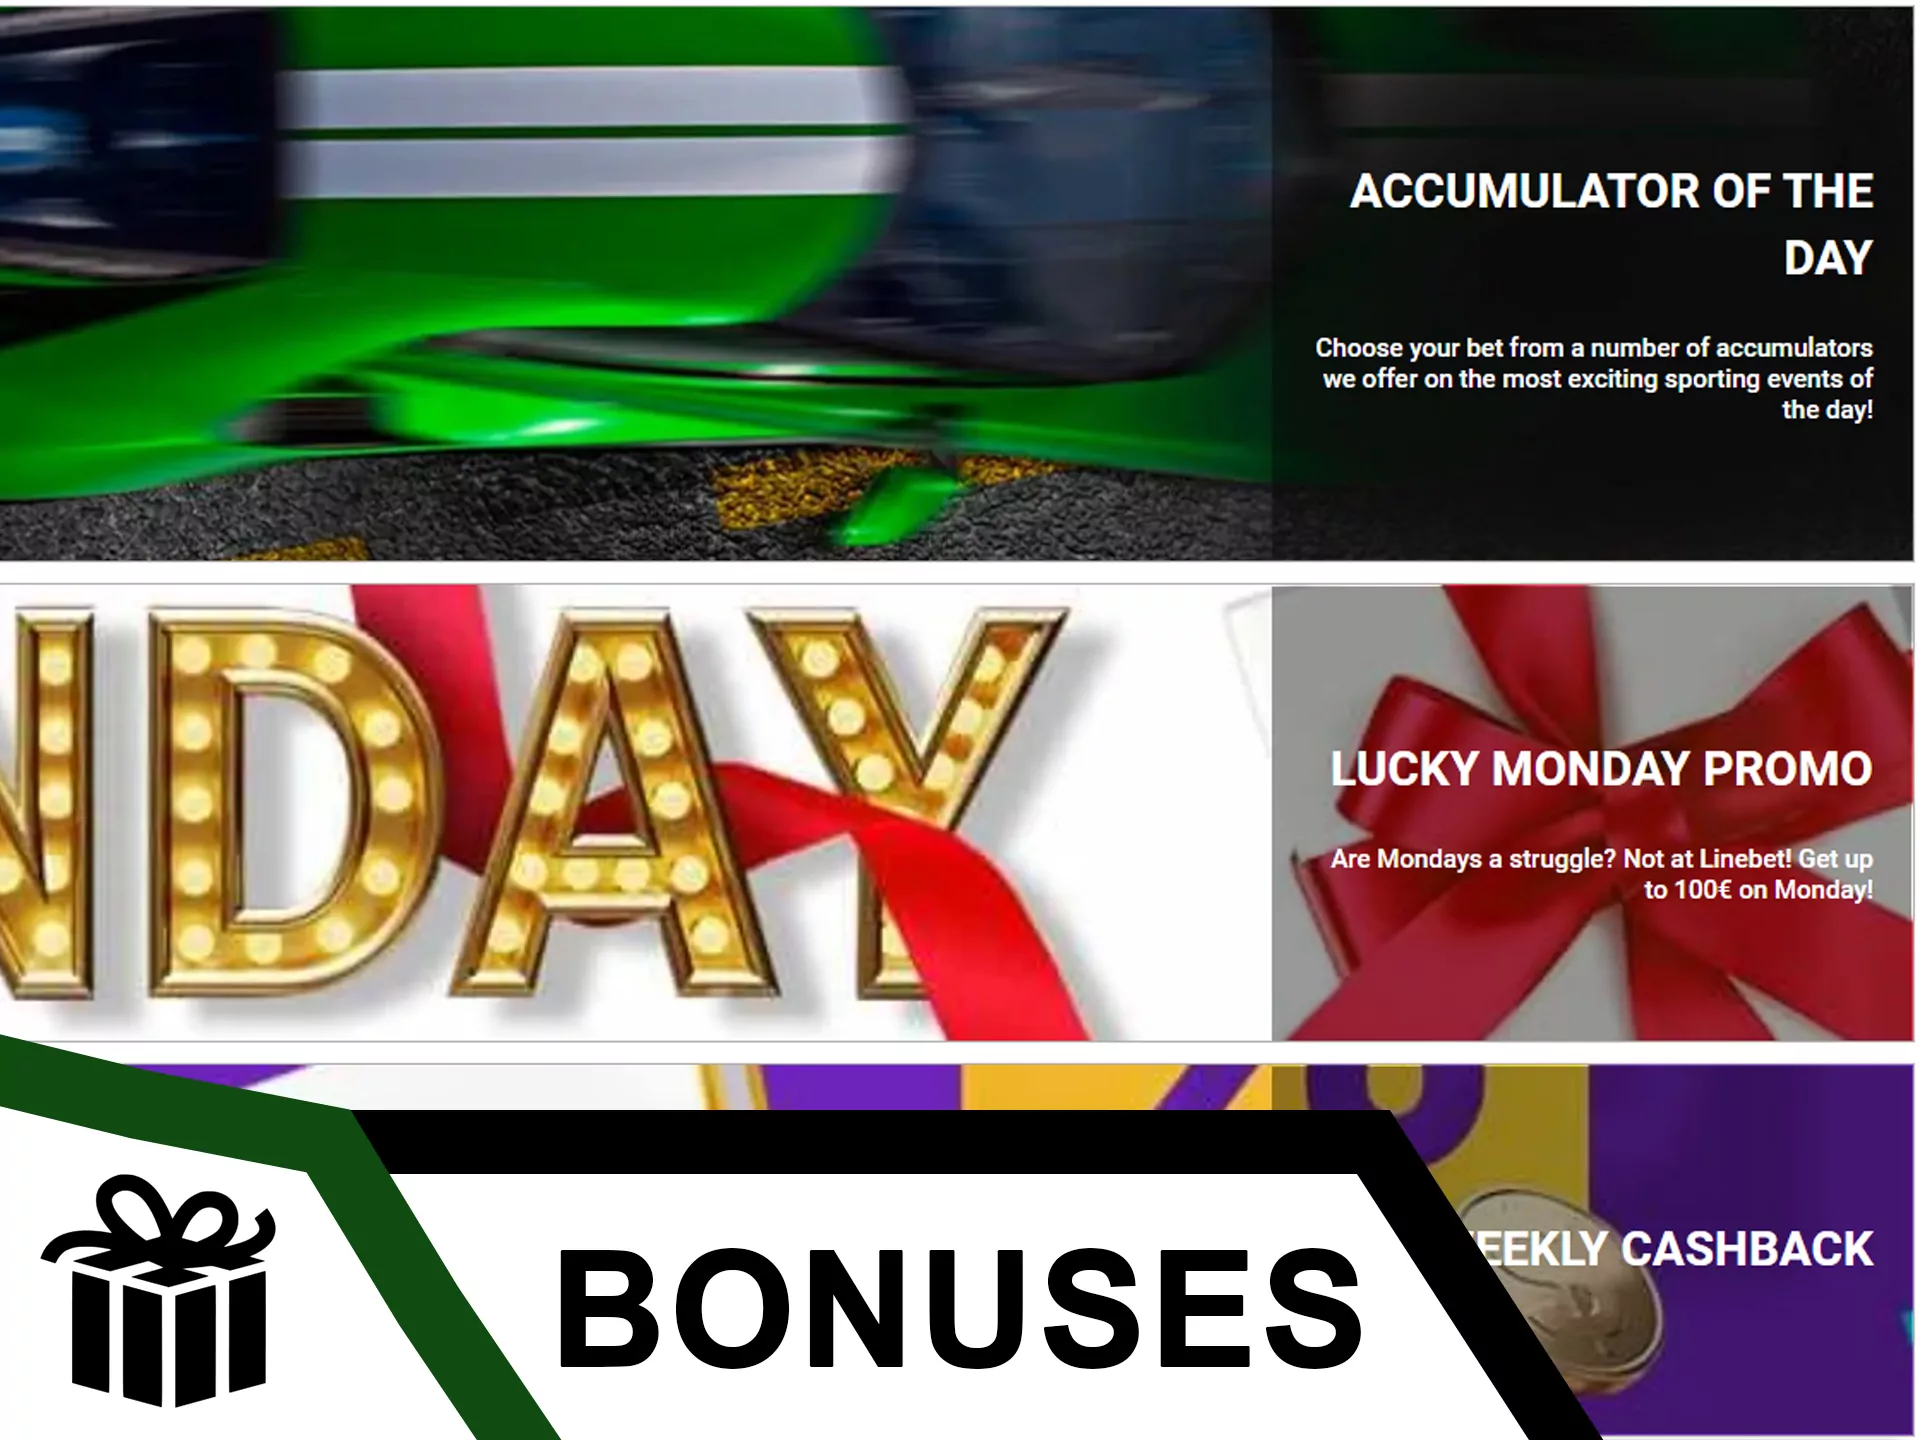 Use Linebet bonuses fot bet with more profit.